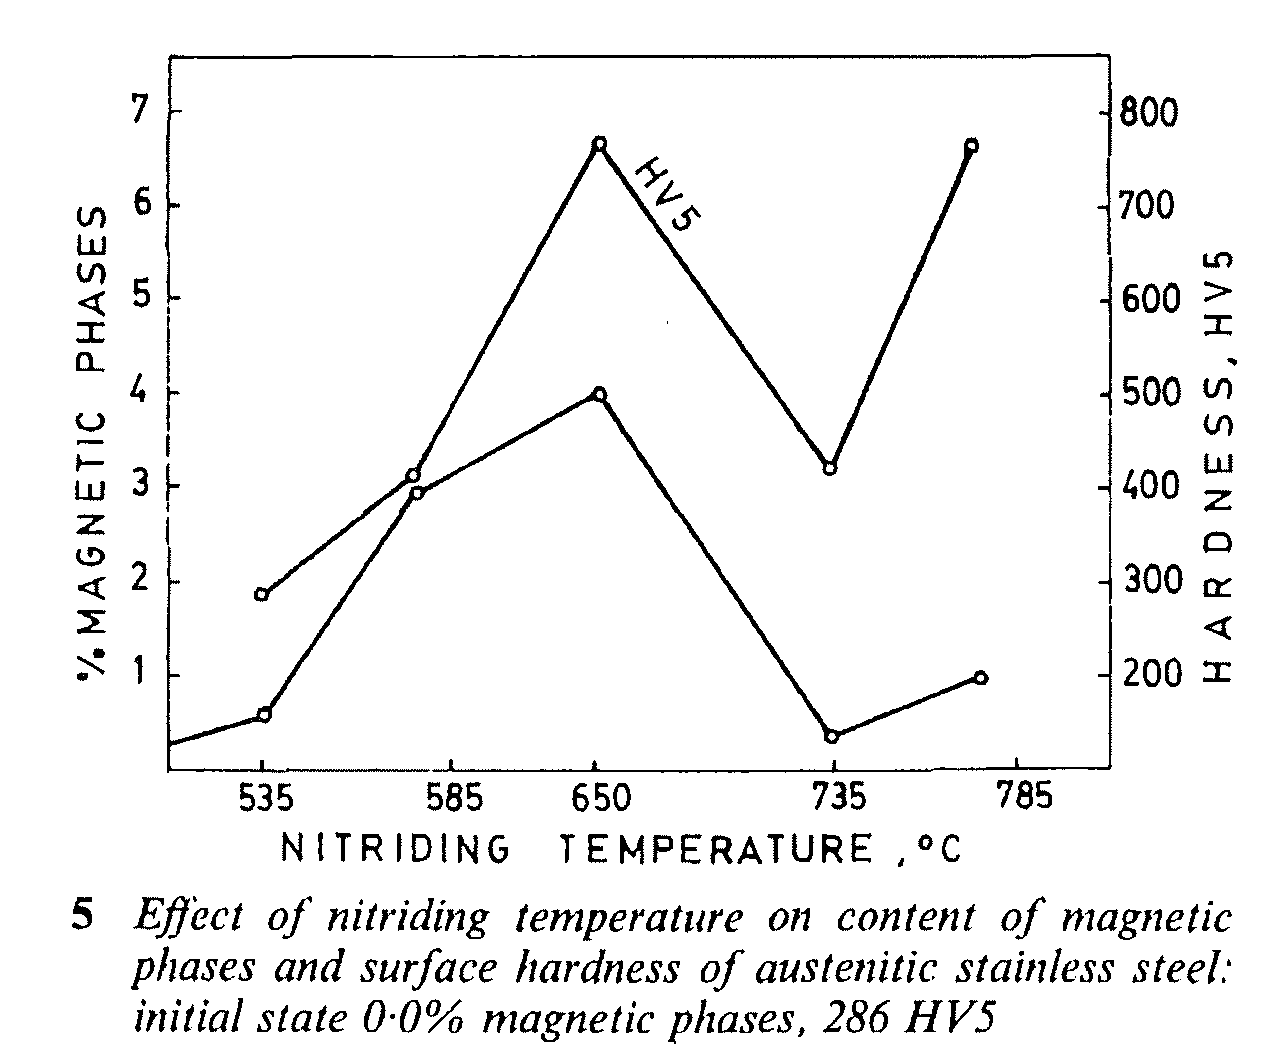 Heat Treating Stainless Steel - Fig. 2 Effect of nitriding temperature on content of magnetic phases